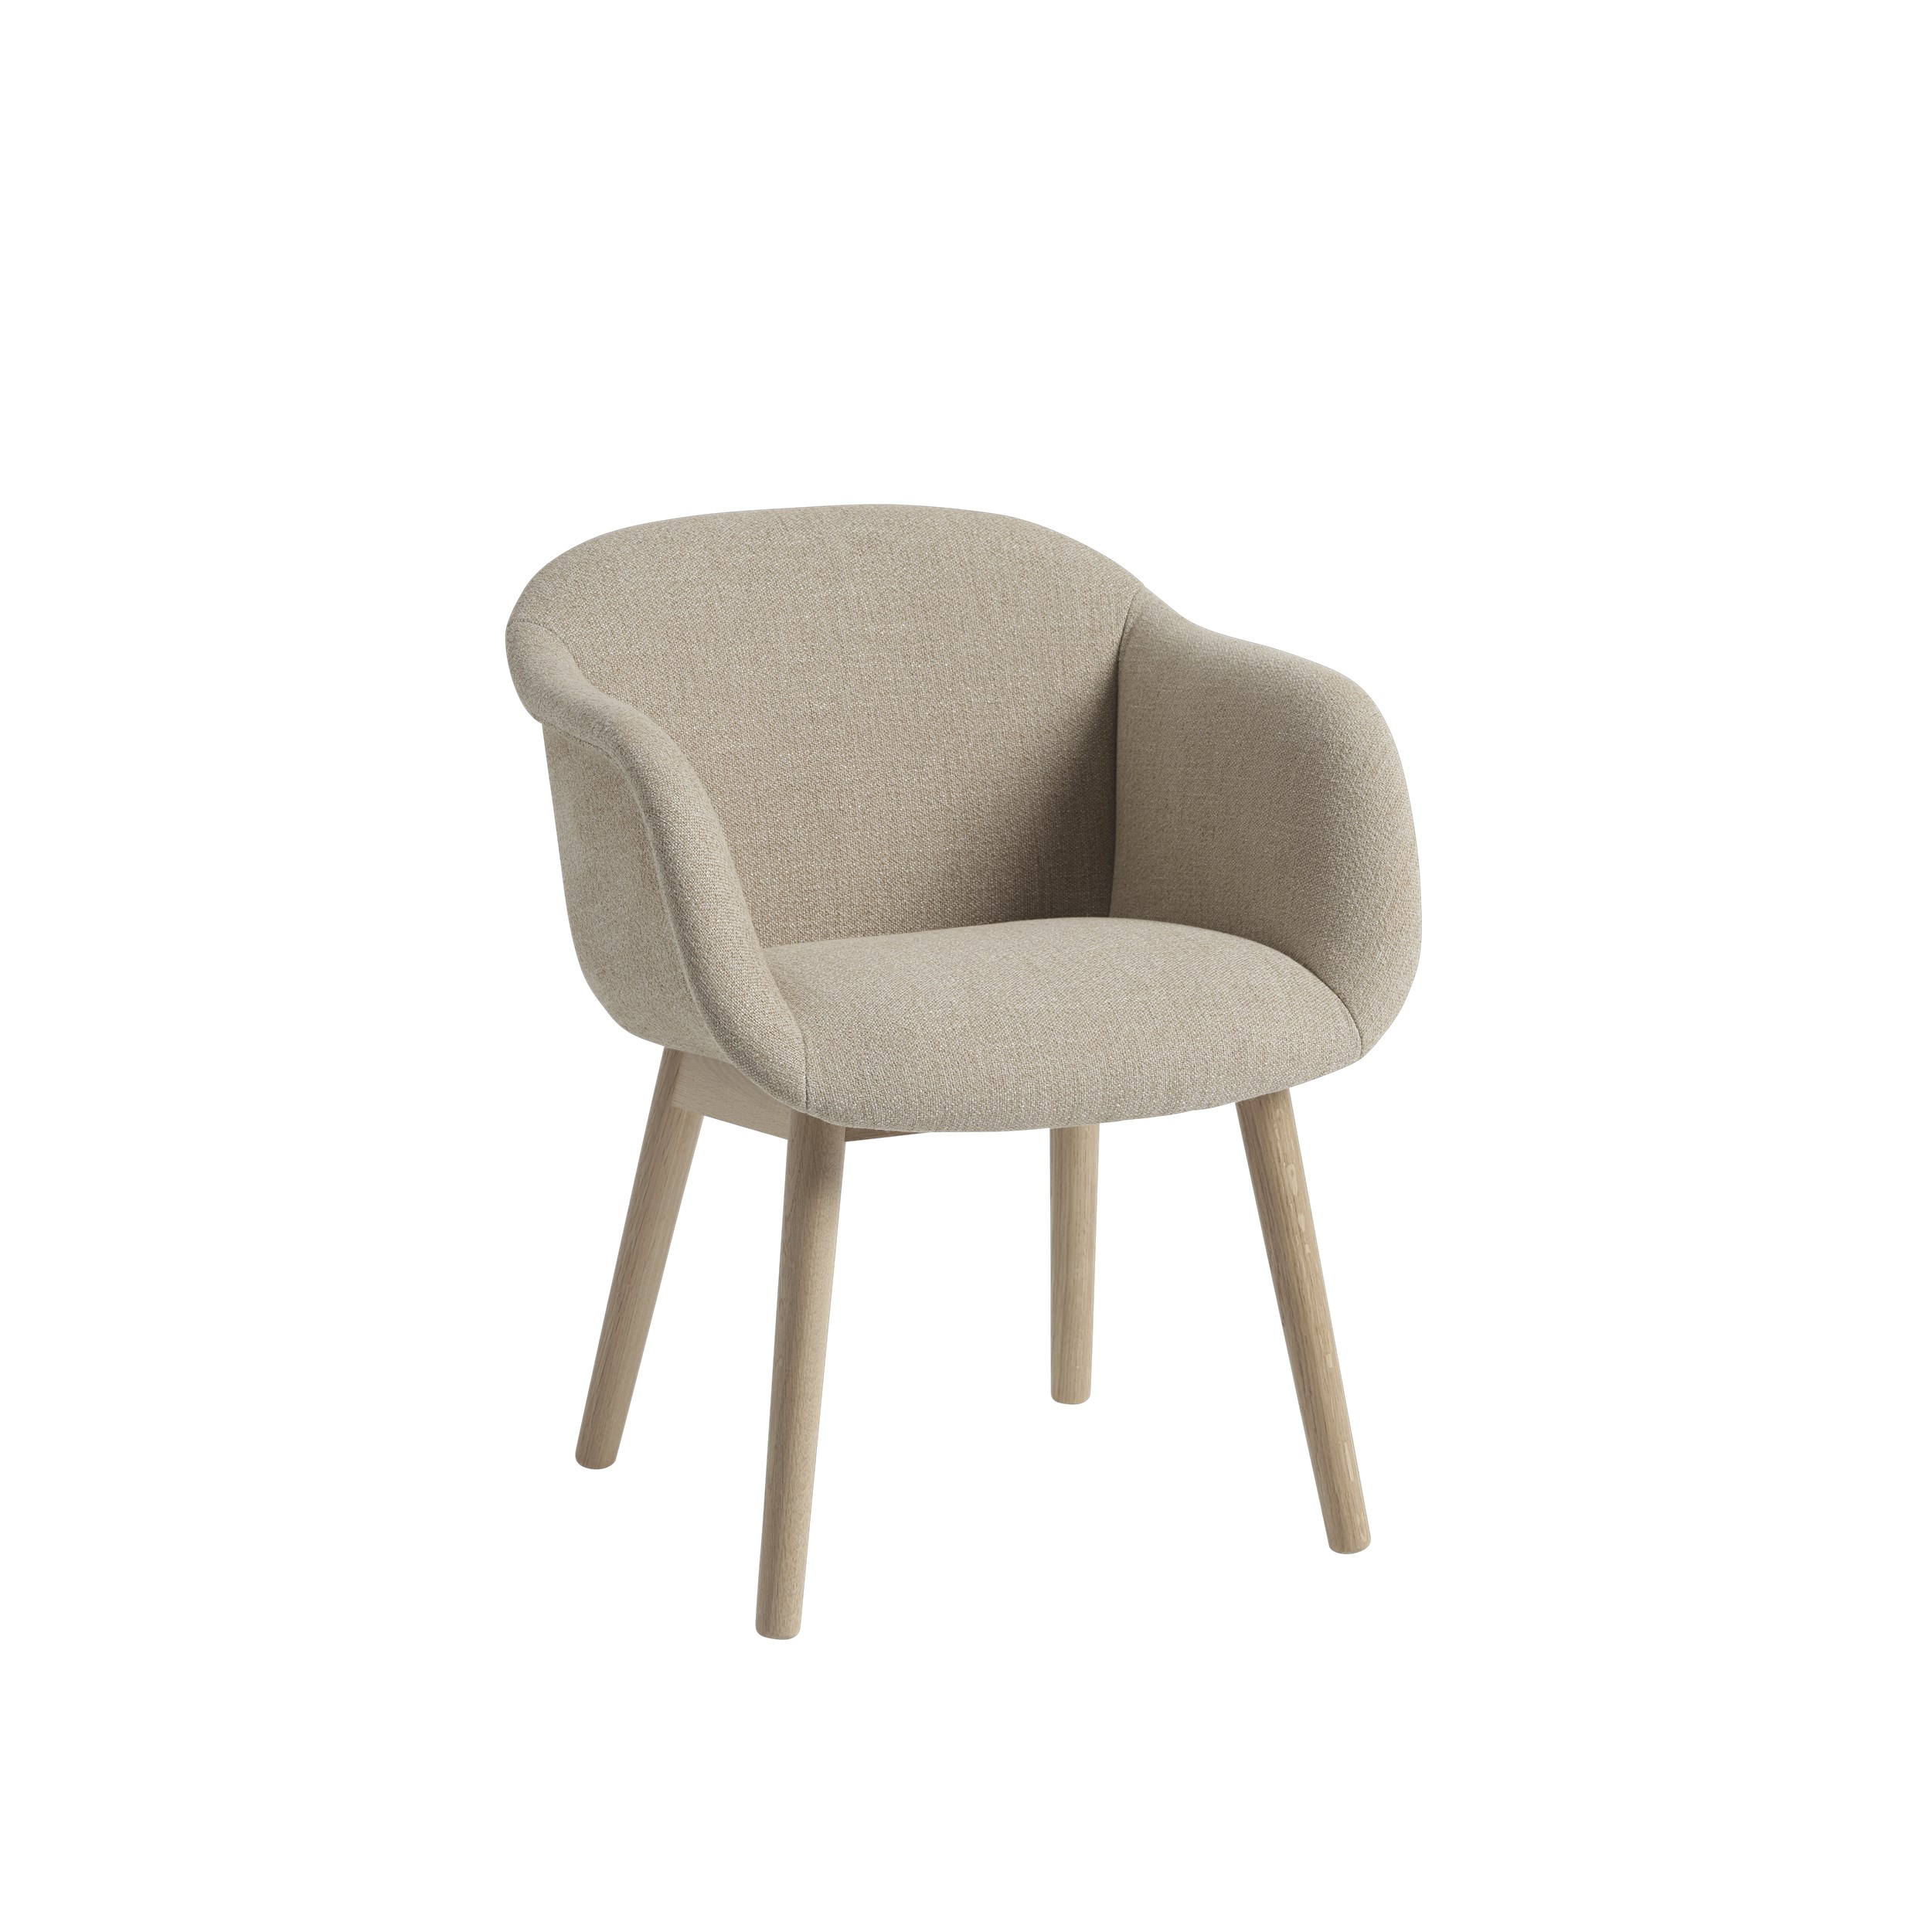 Fiber SOFT Armchair Wood Base in Fabric and Leather